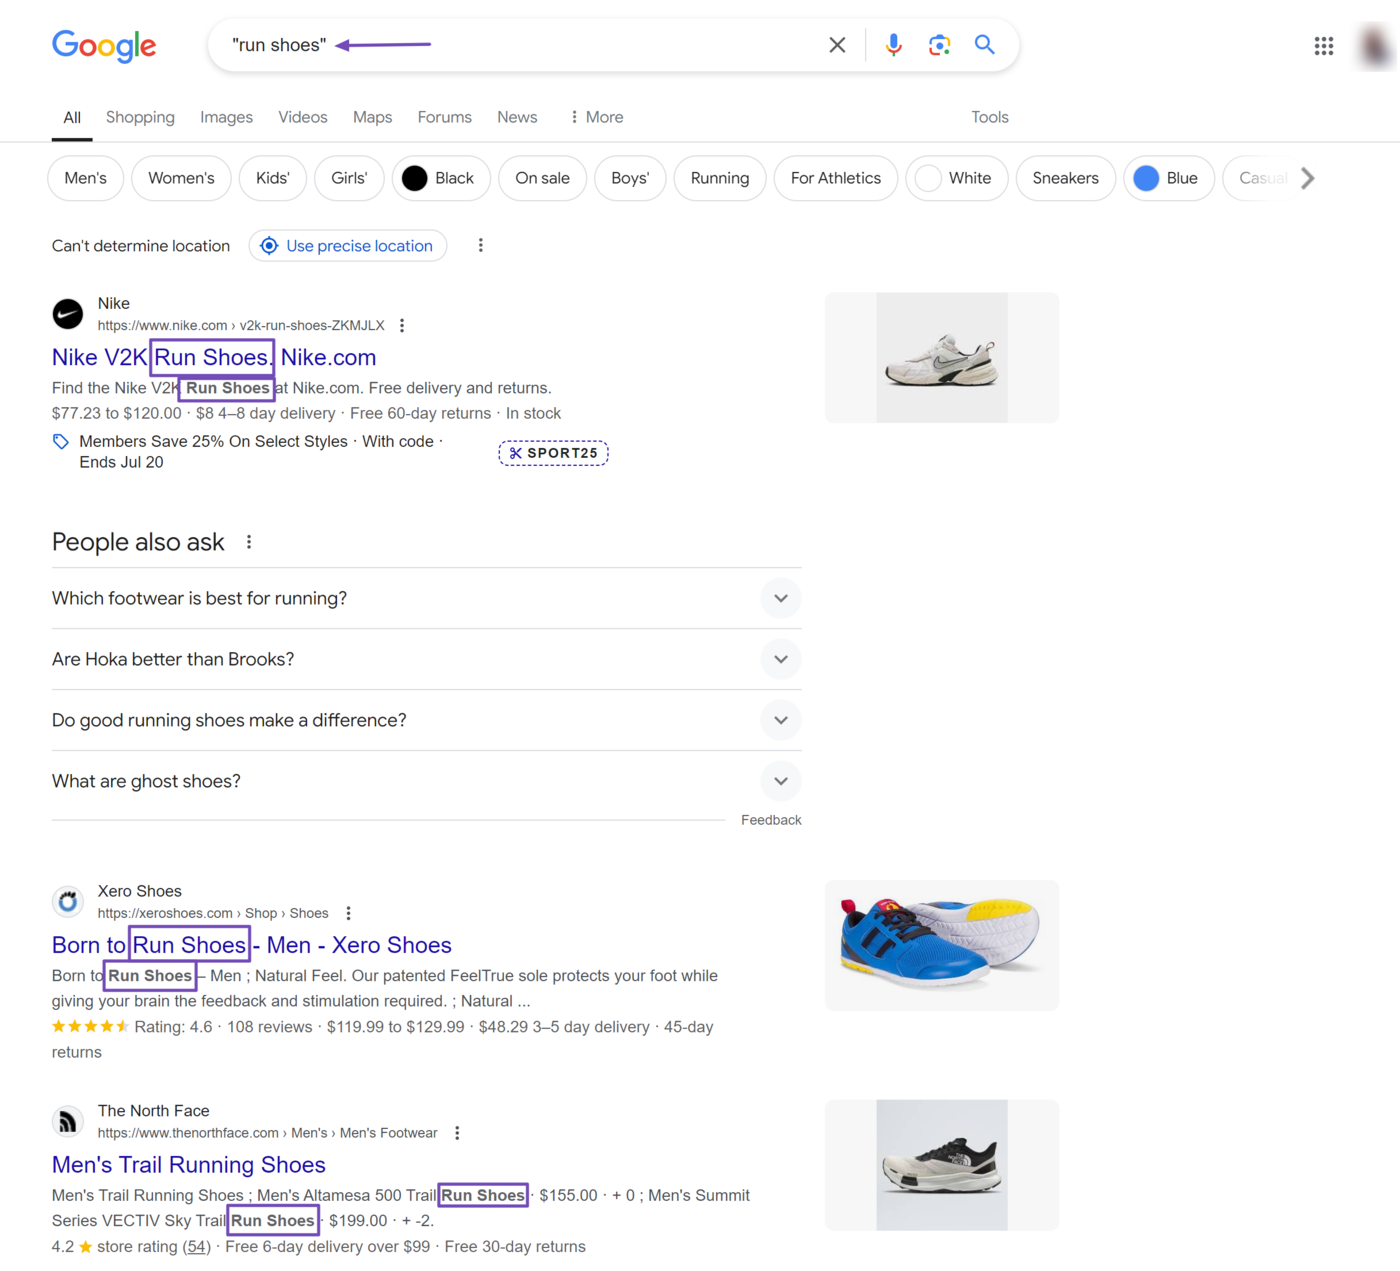 Sample of keyword stemming on search results pages